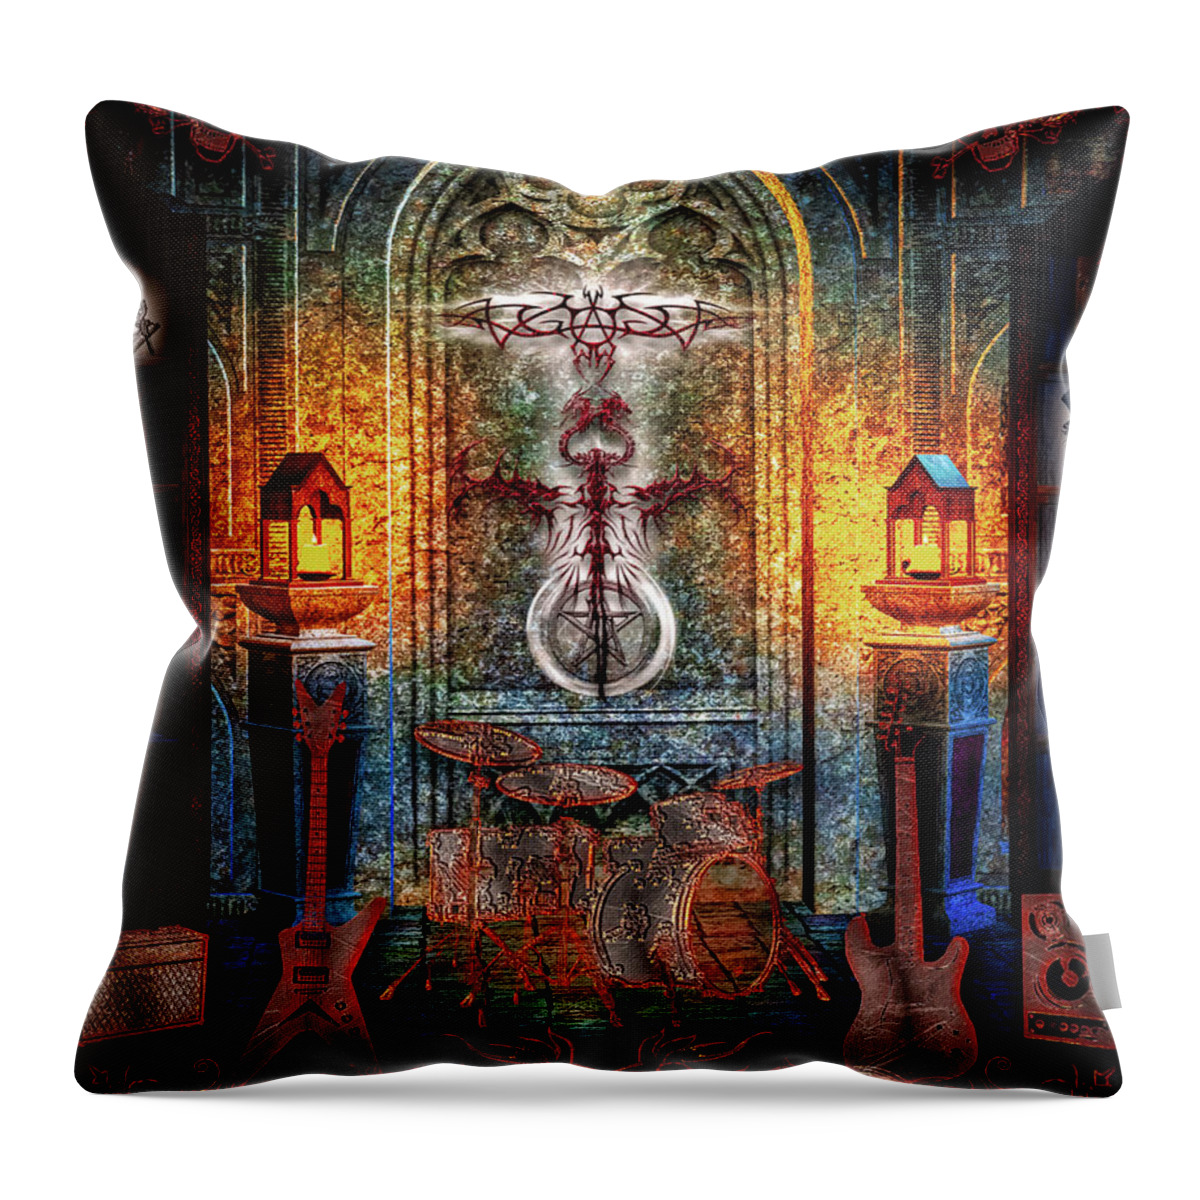 Heavy Metal Throw Pillow featuring the digital art Dance With The Devil by Michael Damiani